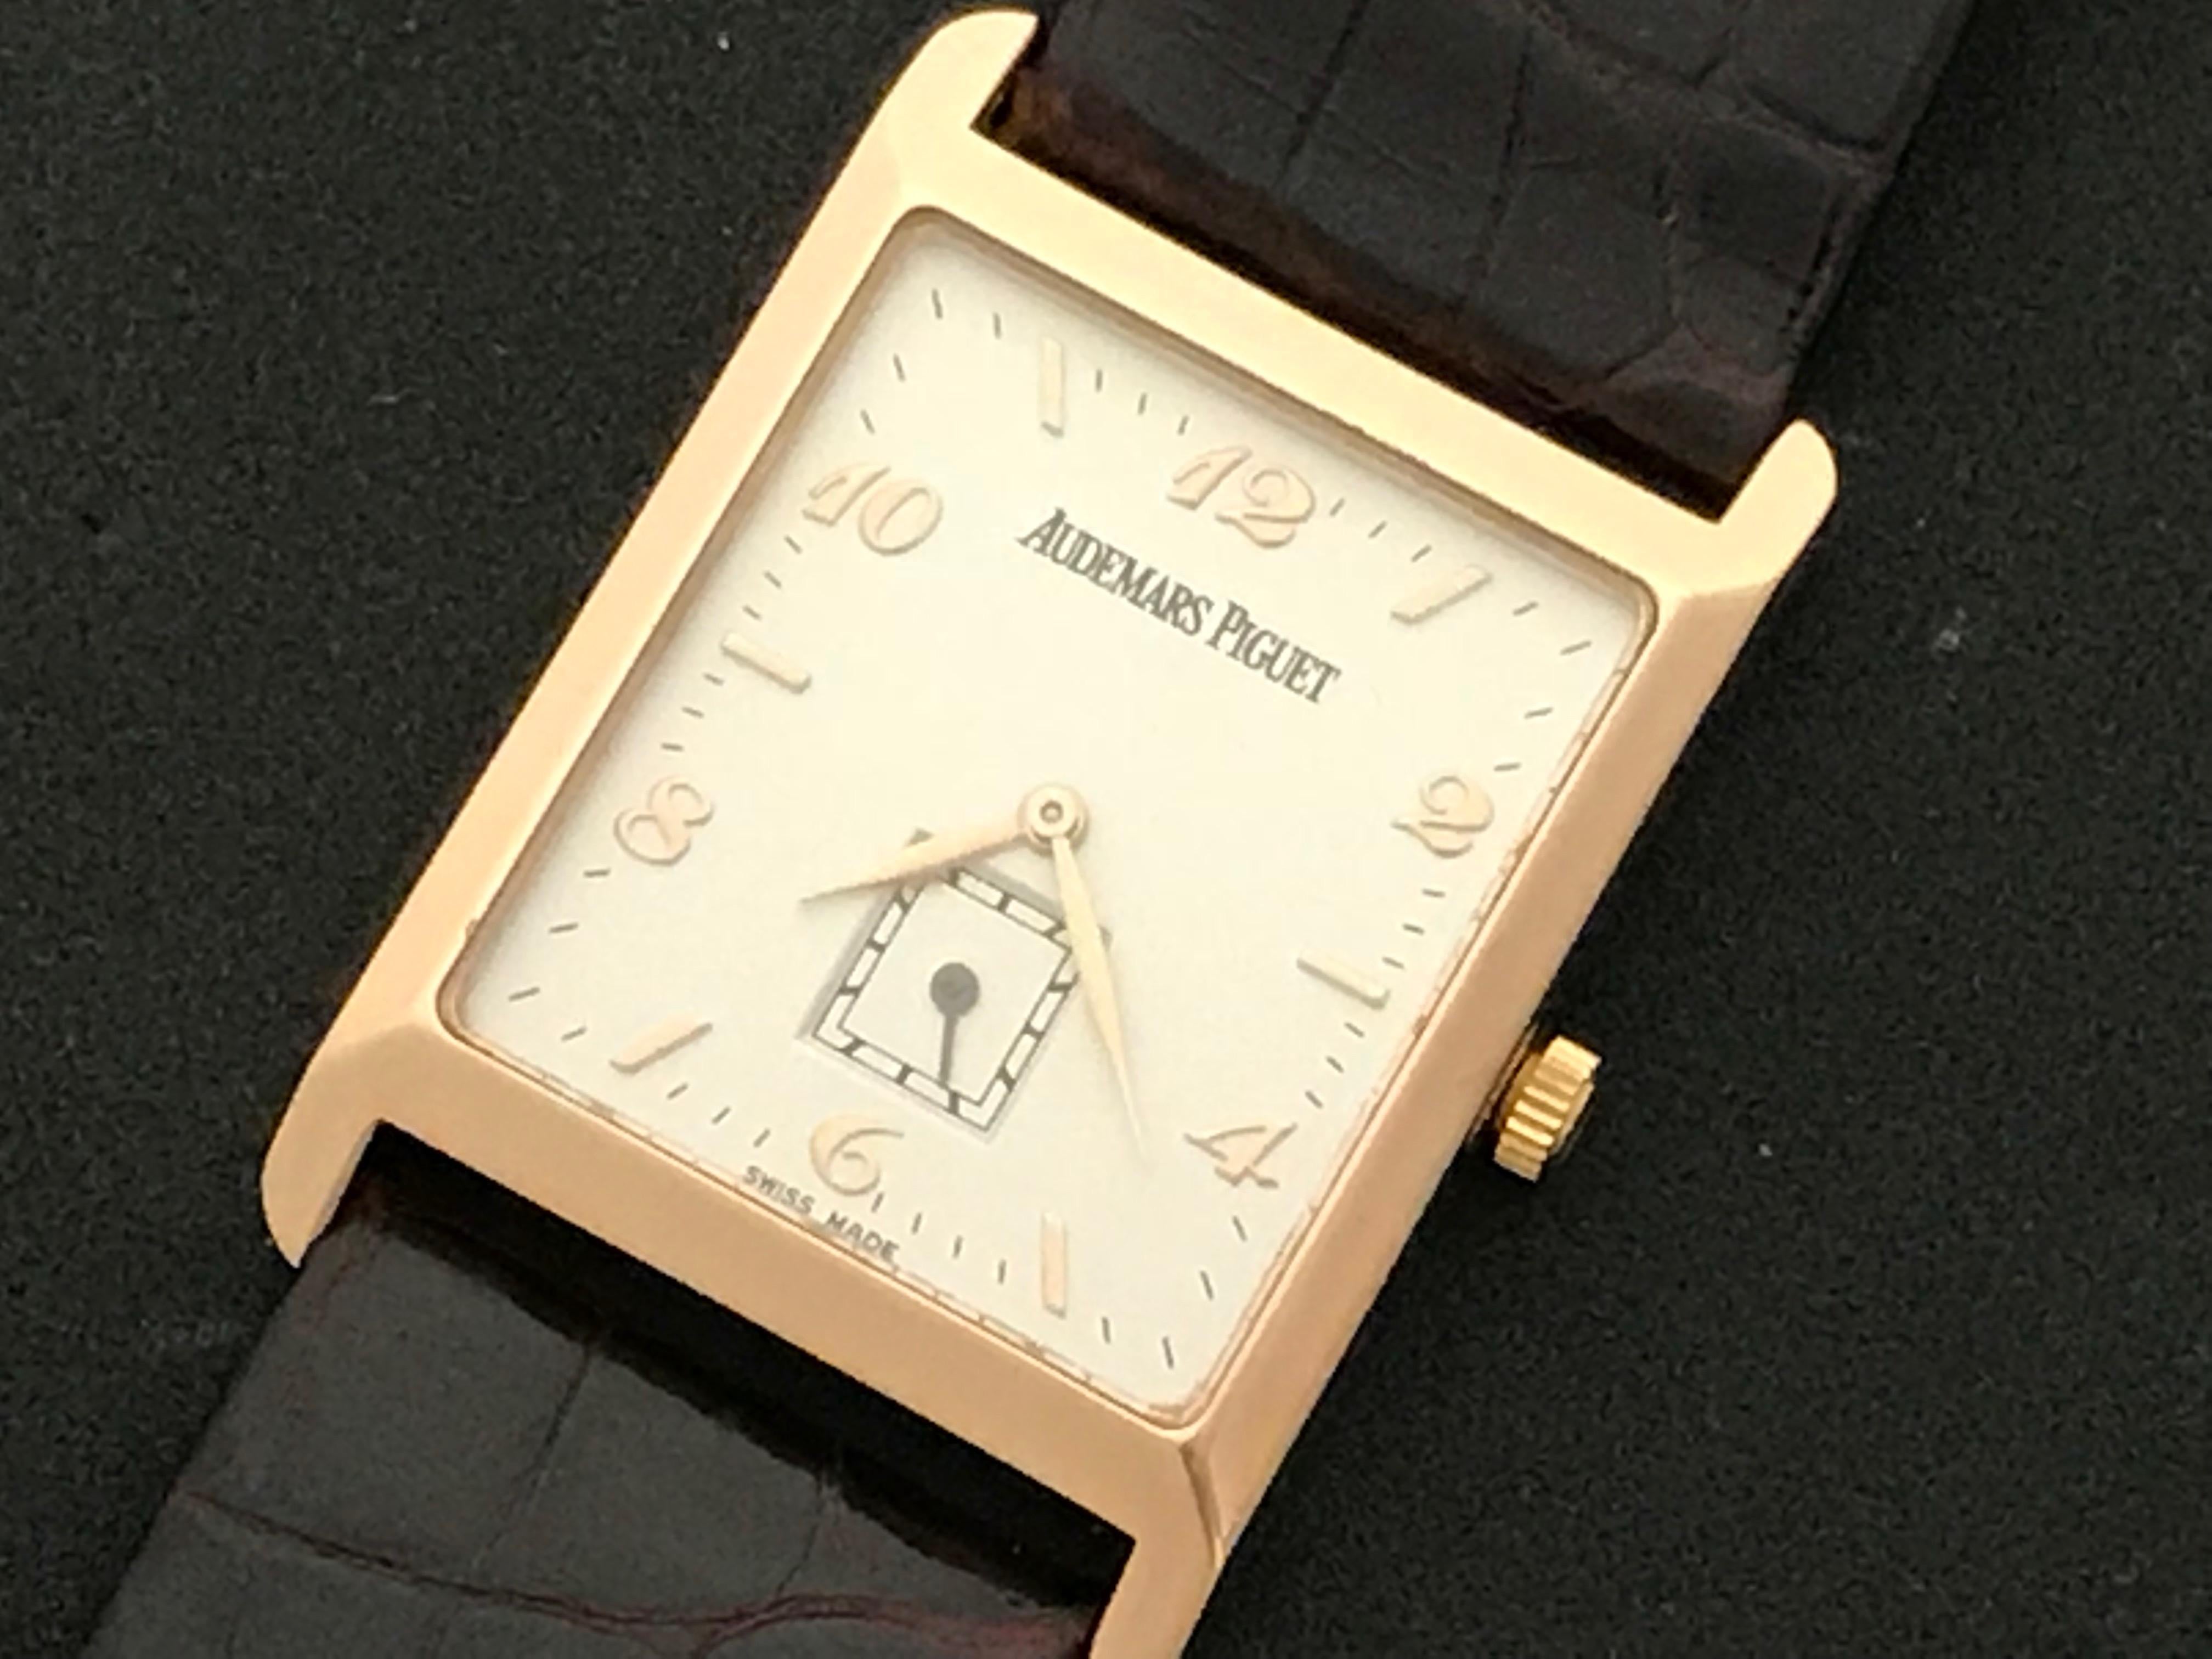 Audemars Piguet Pre Owned Mens Manual Winding wrist watch. Silvered Dial with rose gold hour markers and Arabic numerals, 18k Rose Gold rectangular style case (25.5x36mm). Strap band with 18k Rose gold Audemars Piguet buckle. Audemars Piguet box